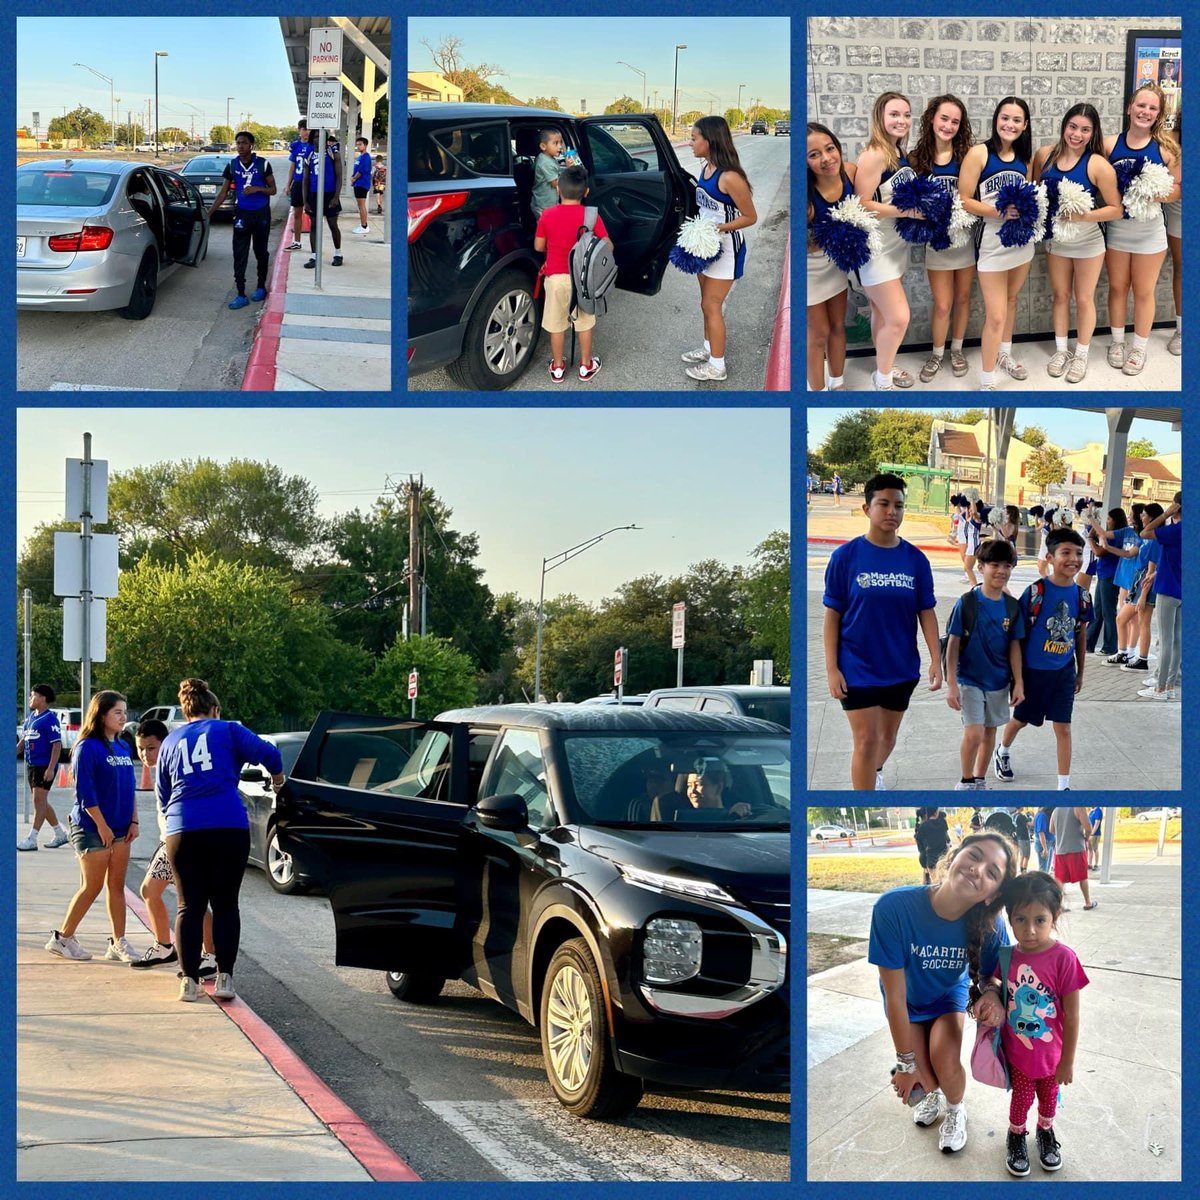 Thanks to @CoachHirst34 and @FunkyCoachMedin for bringing Brahma spirit to the castle this morning! Our little knights were welcomed by athletes, cheer, and band and we got ready to represent at the #futurebrahma game tomorrow @PrincipalHDZ